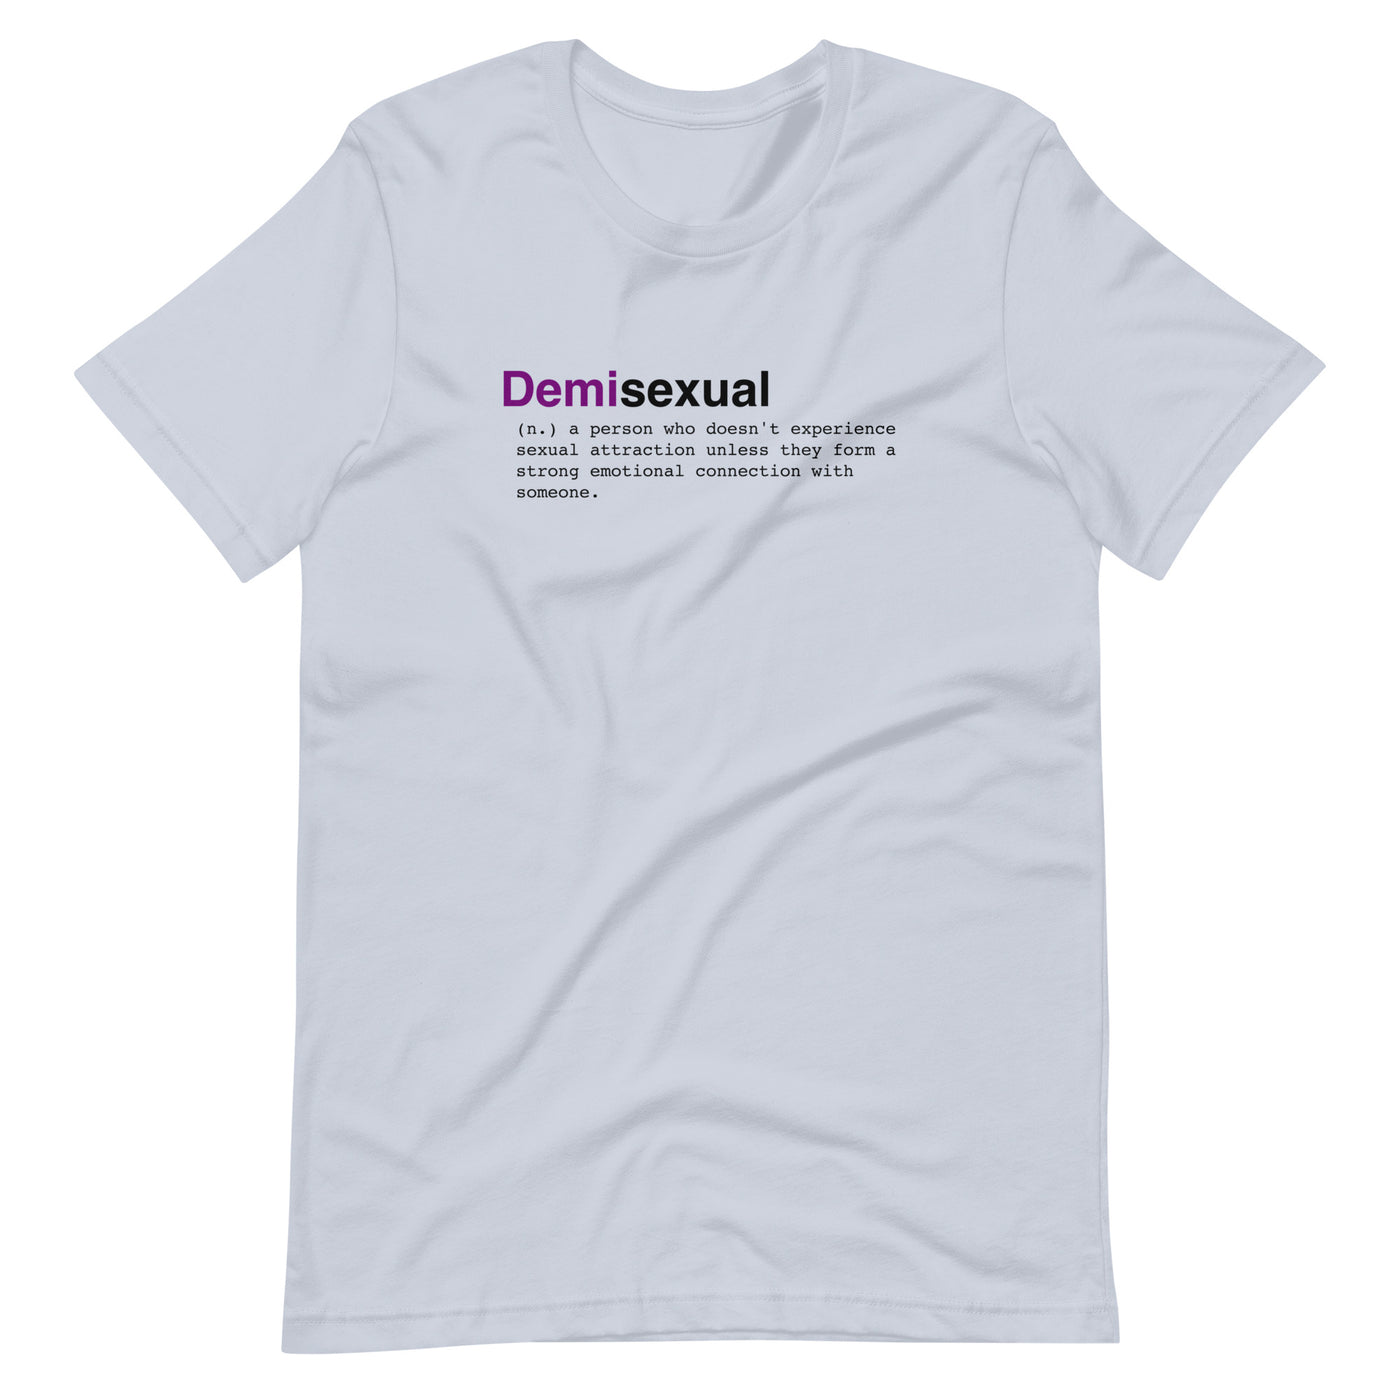 Pride Clothes - Definition of Demisexual Shirt - Light Blue